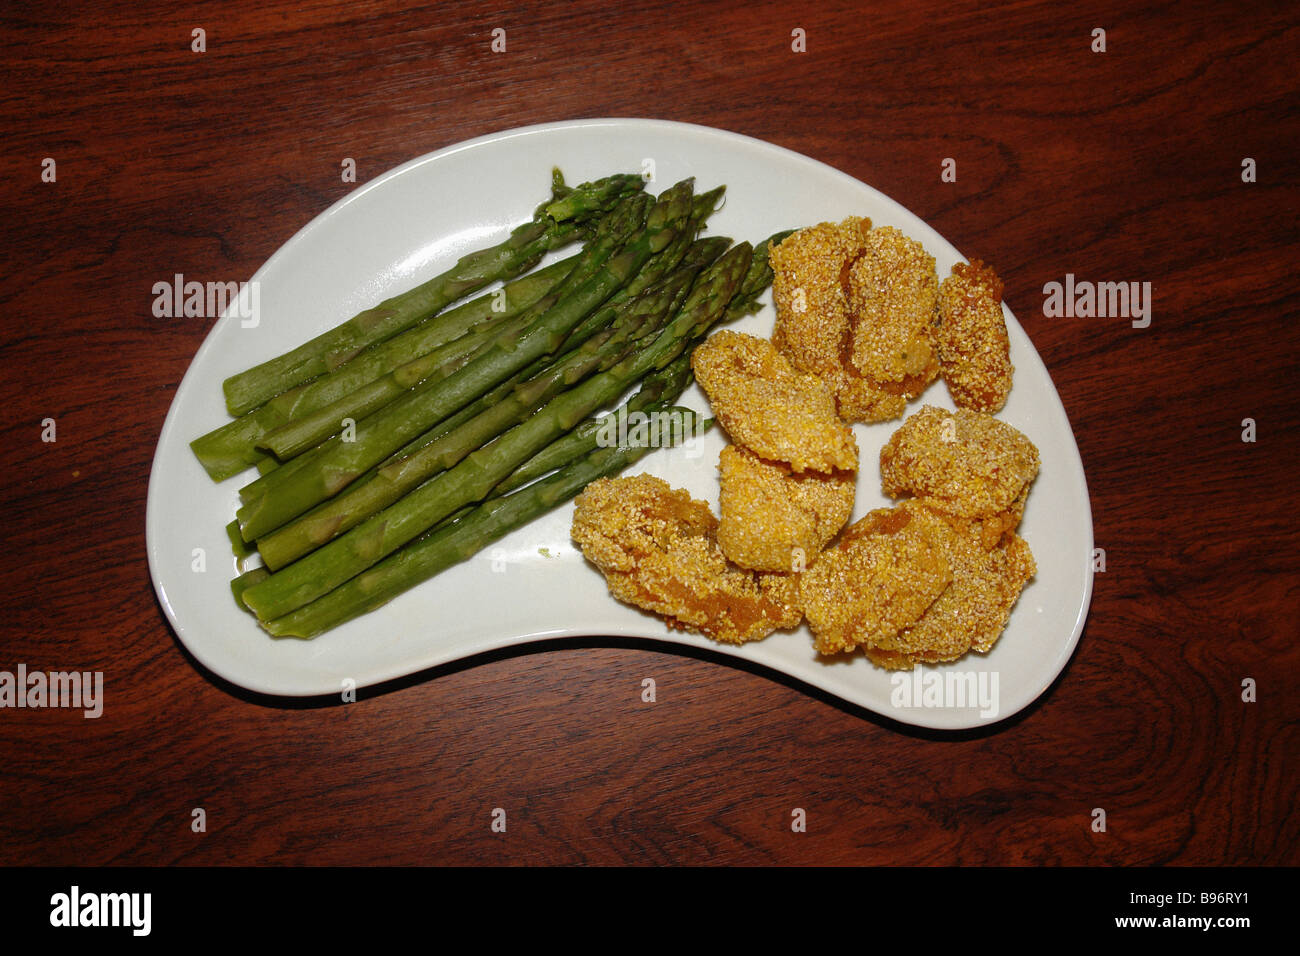 still life of a boomerang shaped plate of bacalaitos cod fish fritters and asparagus on a wood table viewed from above Stock Photo